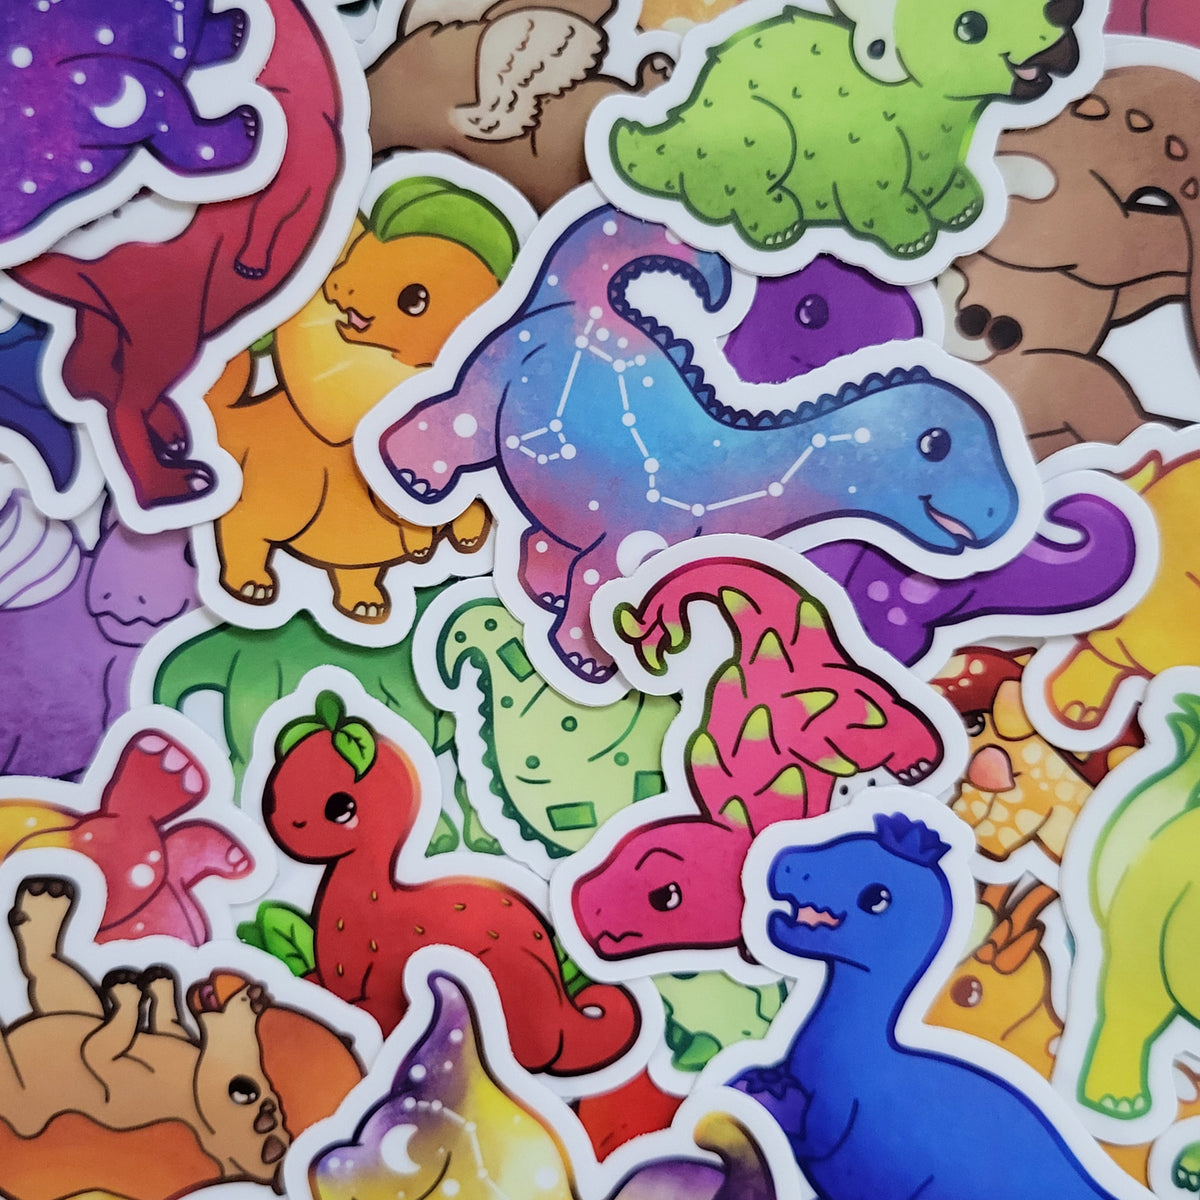 Dinosaur Stickers by Recollections™